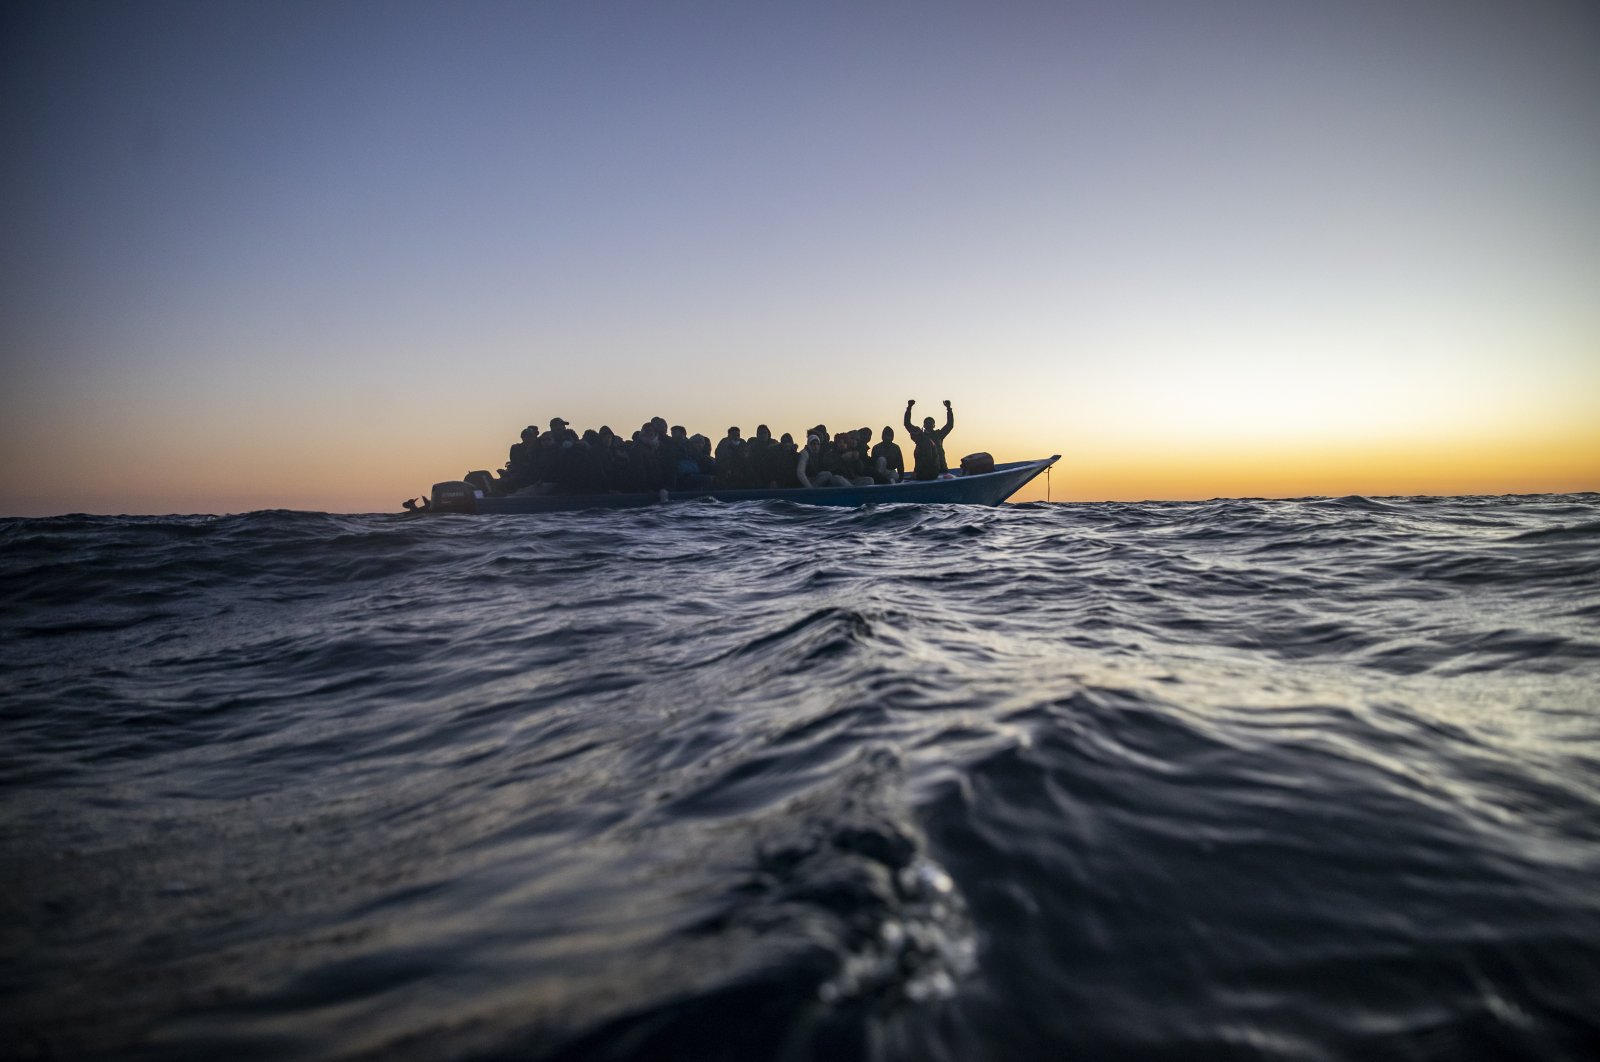 Migrants and refugees of various African nationalities wait for assistance aboard an overcrowded wooden boat in the Mediterranean Sea 122 miles off the coast of Libya as aid workers on the Spanish search and rescue vessel Open Arms approach, Feb. 12, 2021. (AP Photo)